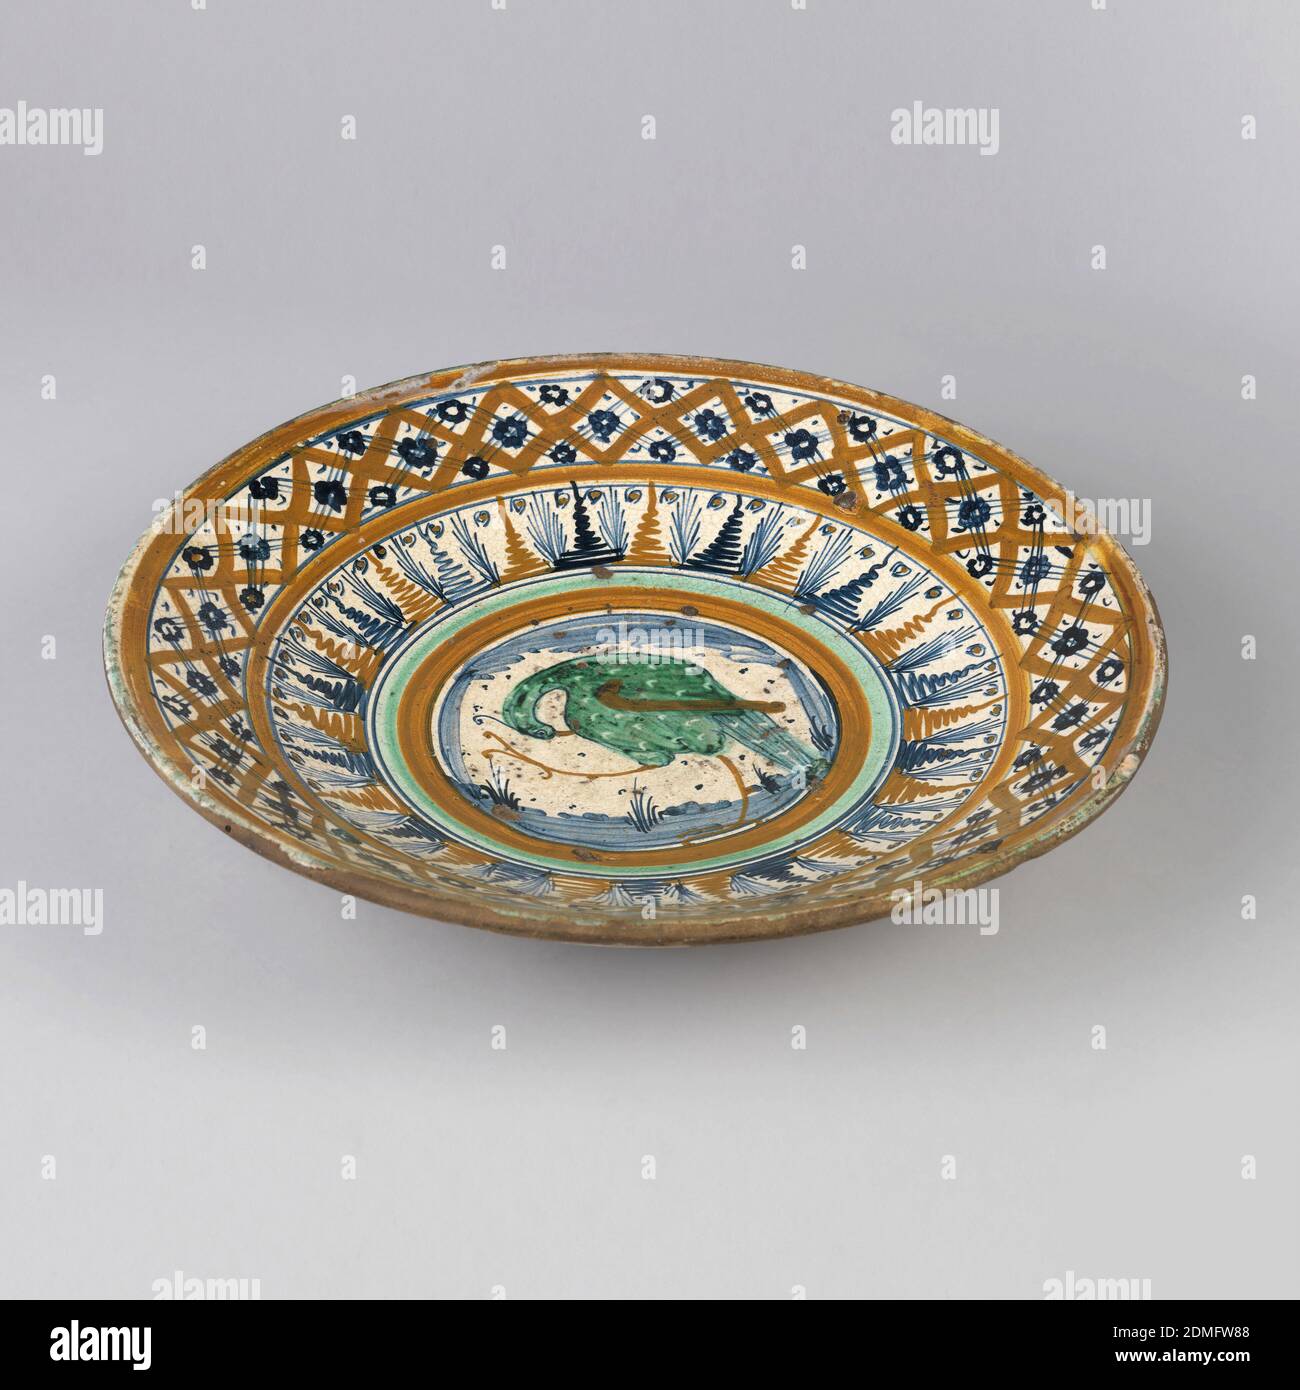 Dish, Glazed earthenware, Saucer-shaped, painted in center with green bird within orange and green borders and two outer borders in orange and blue., Montelupo, Italy, ca. 1490–1520, ceramics, Decorative Arts, Dish Stock Photo